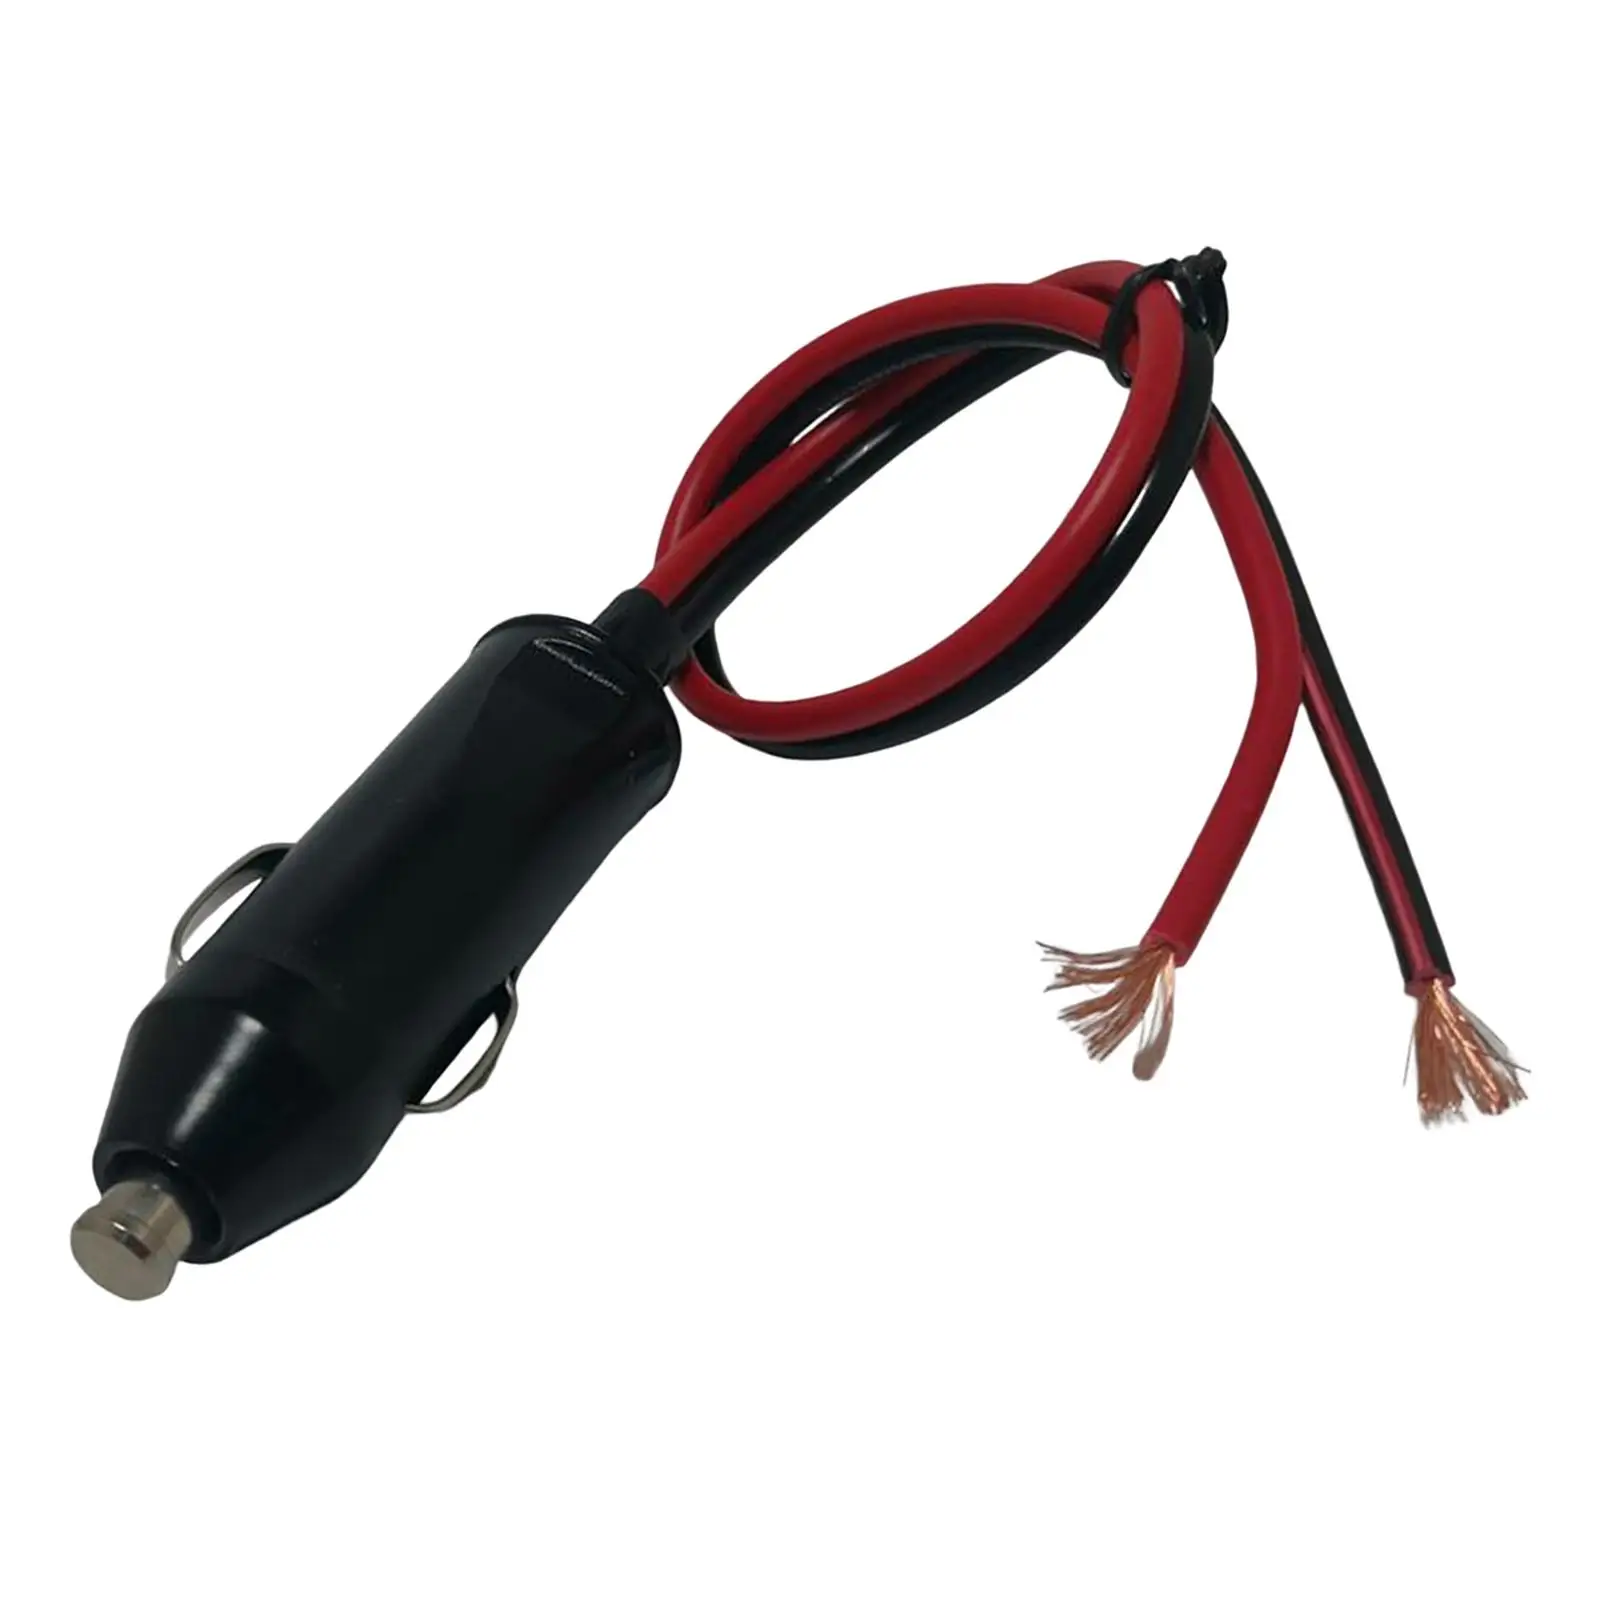 2-4pack Cigarette Lighter Male Plug with Leads with 10cm Extension Cable Cars